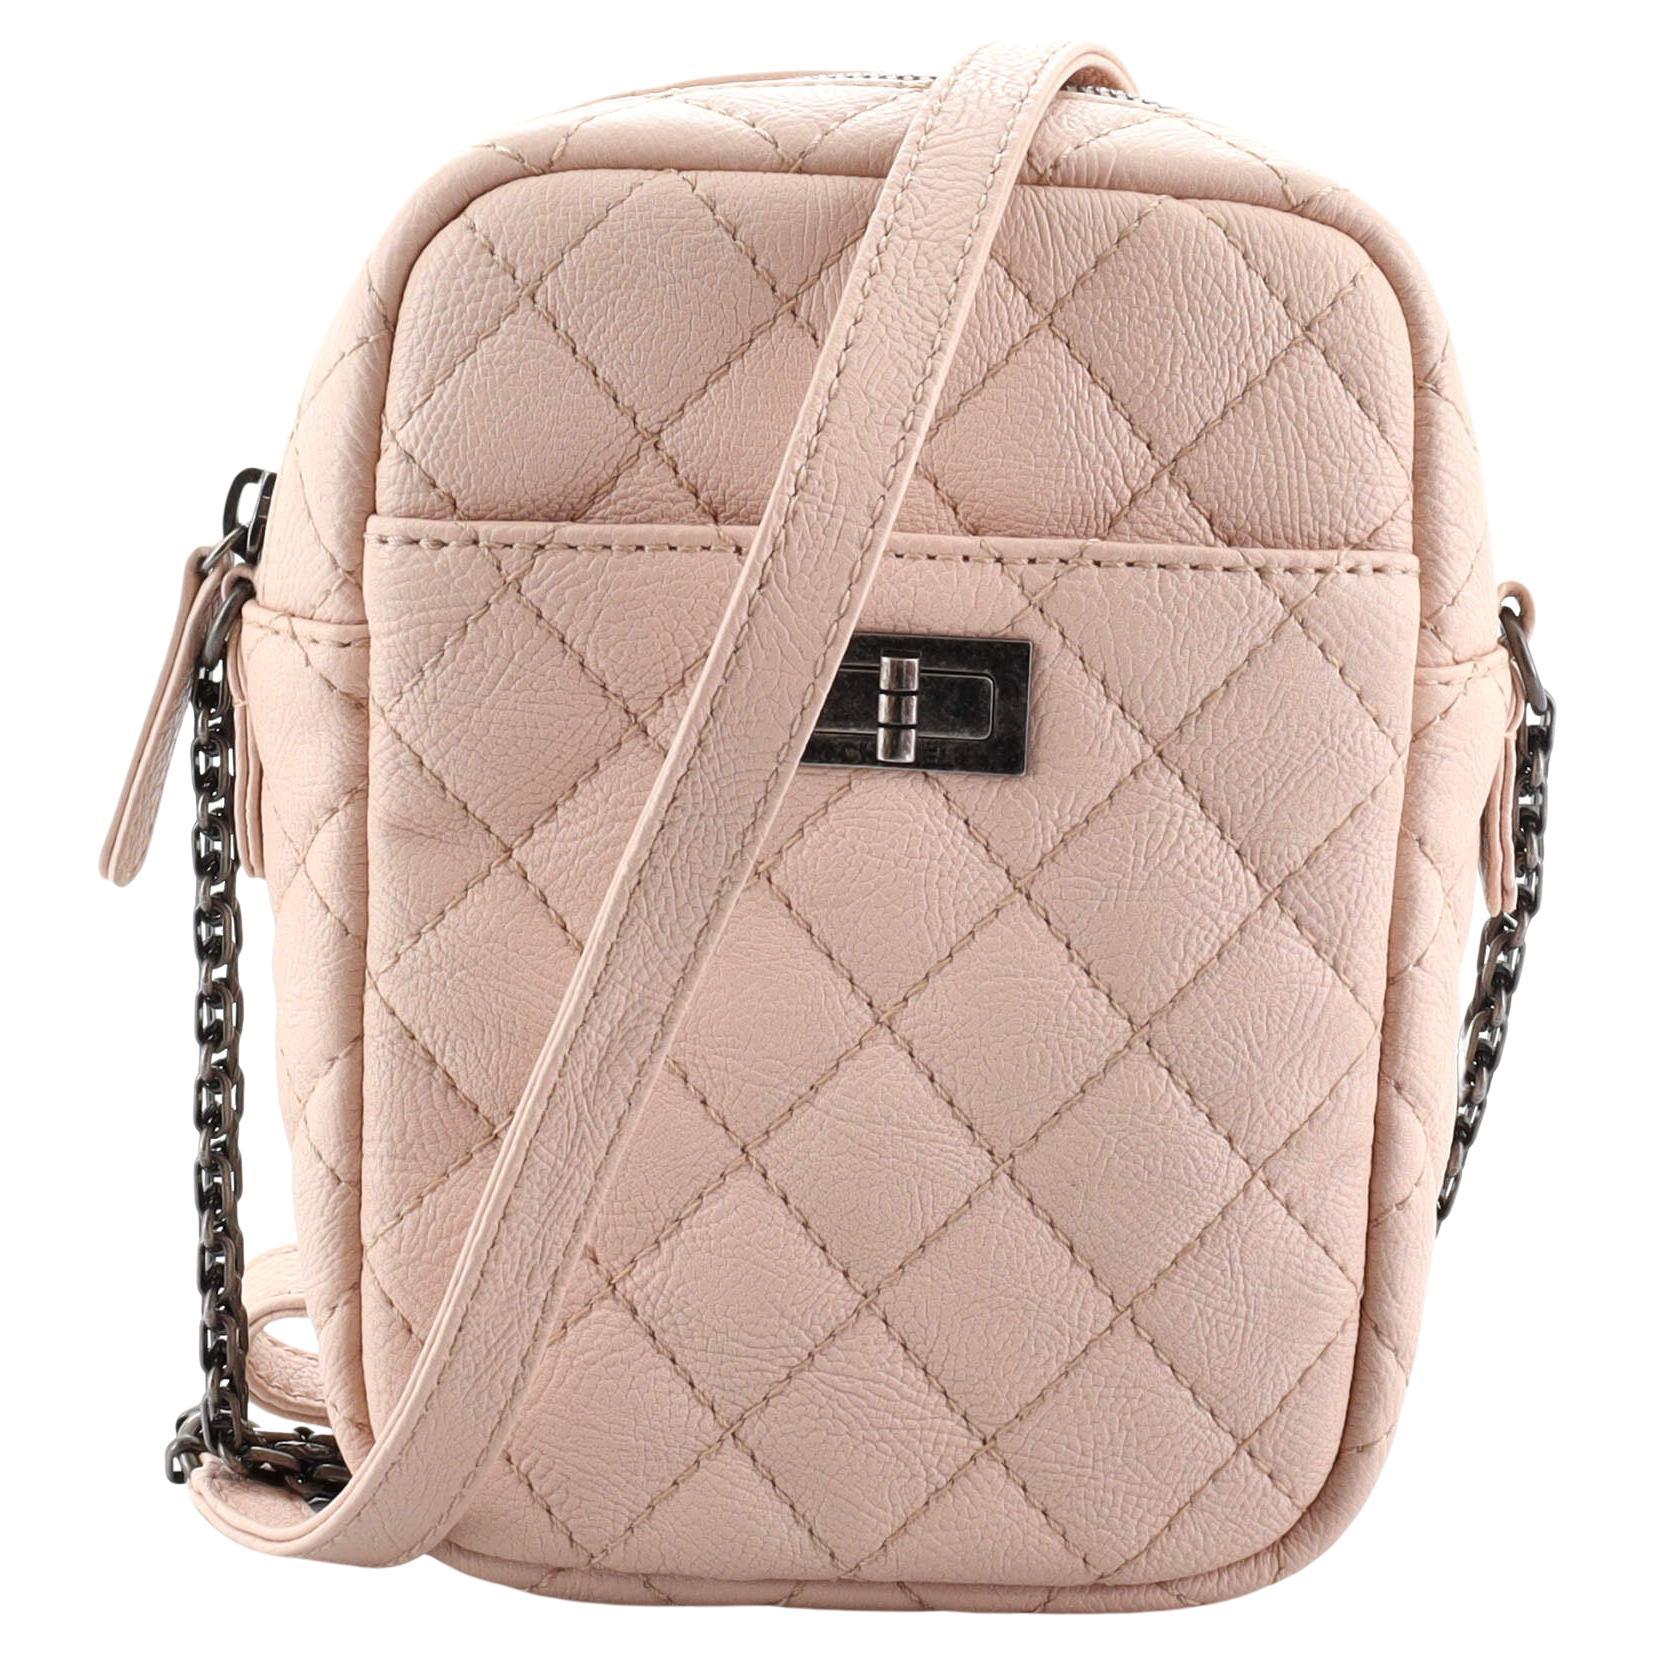 CHANEL Camera Case Leather Exterior Quilted Bags & Handbags for